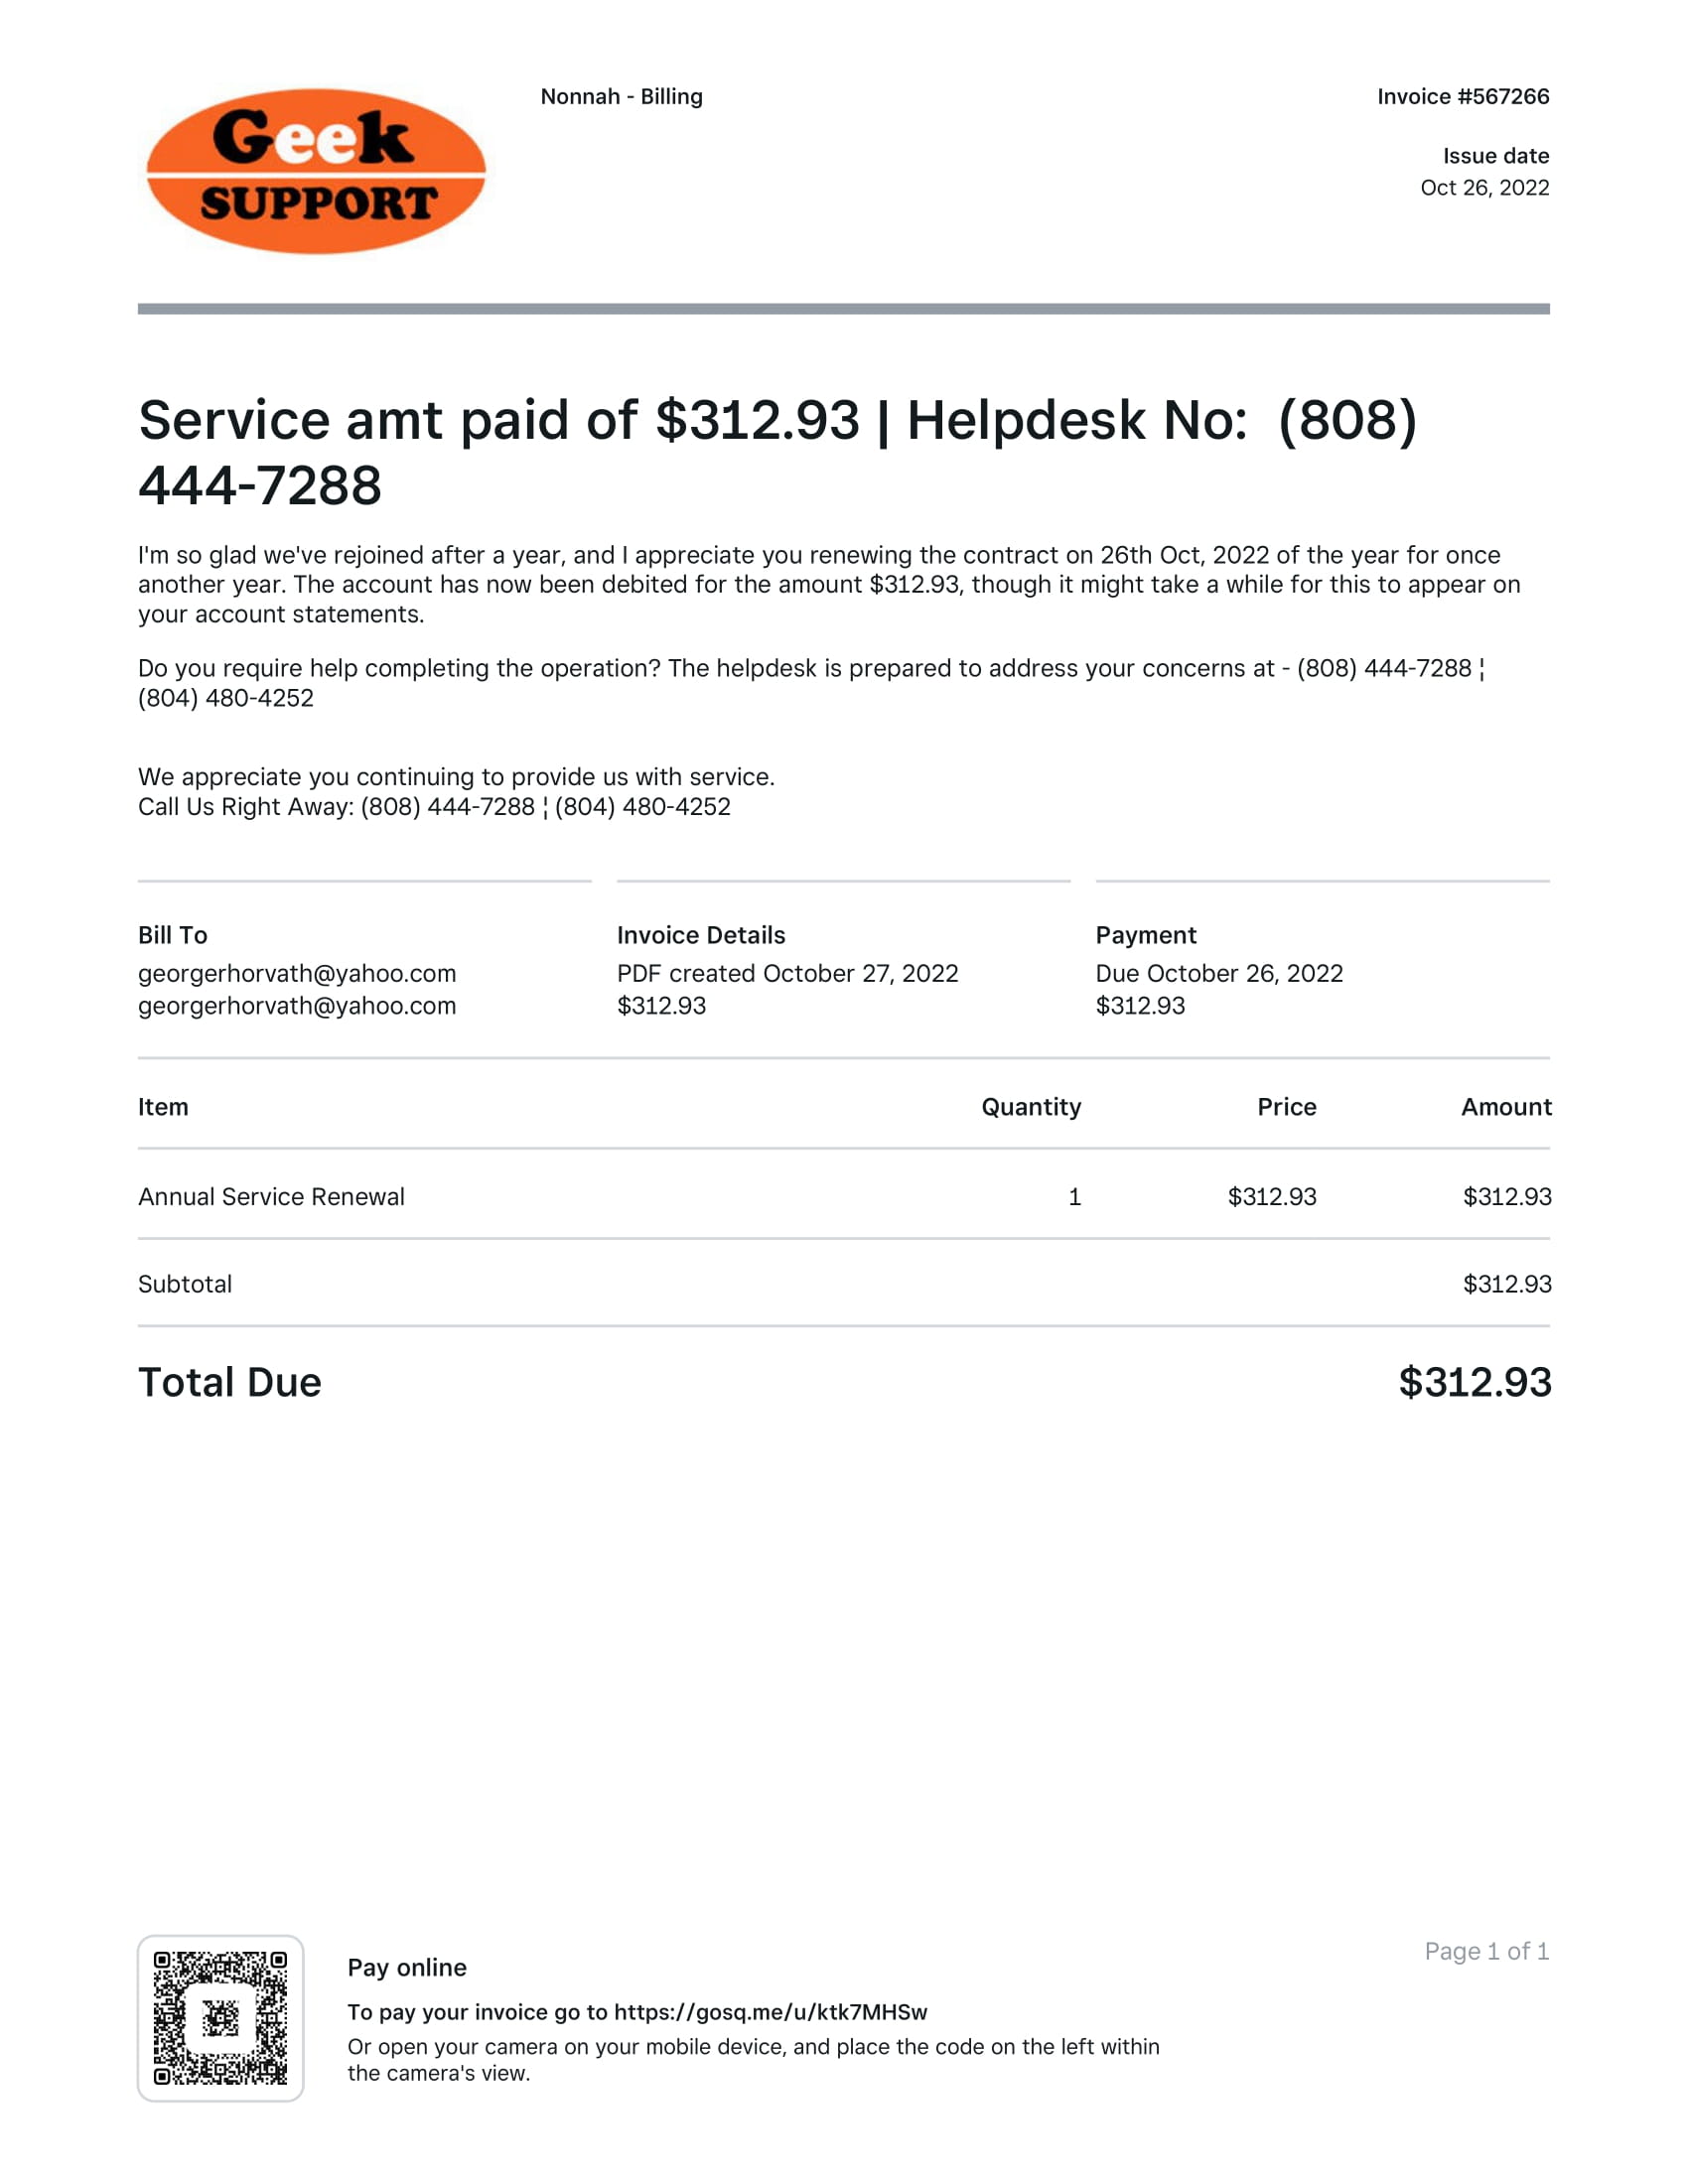 Geek Support Scam Nonnah Billing Renewal Invoice